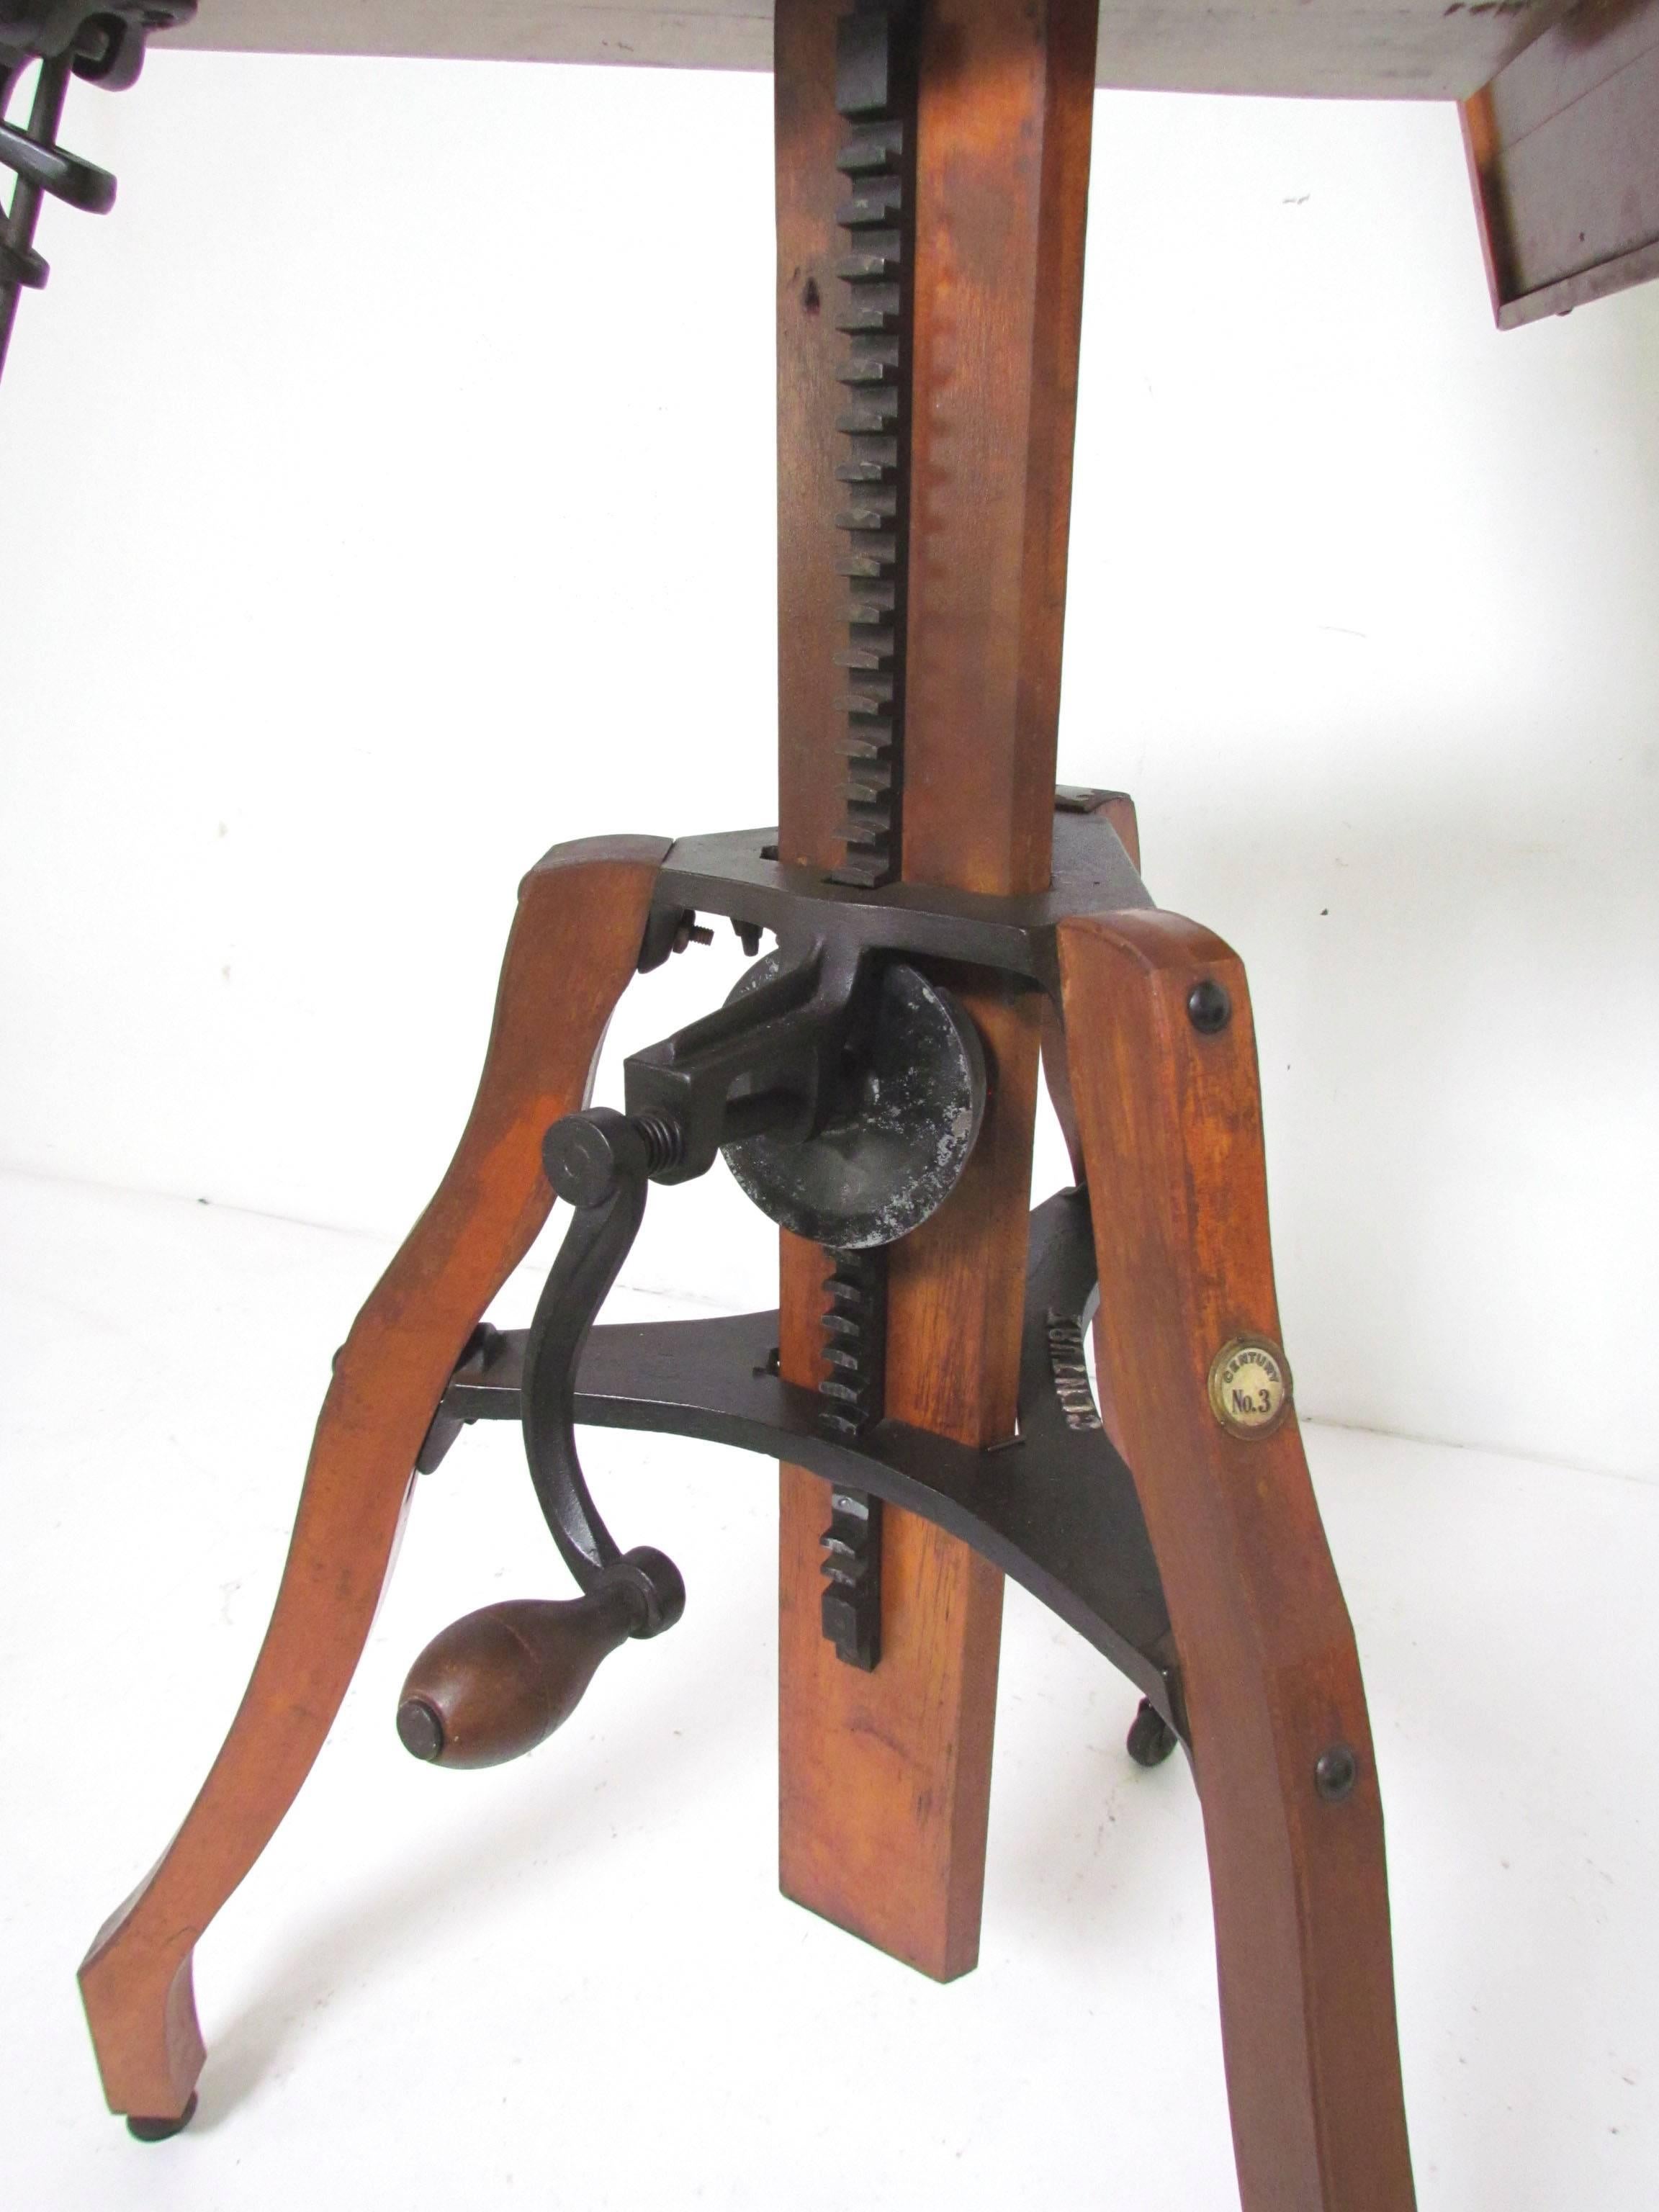 Antique late 19th century pochade or sketching easel on tripod legs with casters, adjustable height via hand crank mechanism, and adjustable tilt via clip and rod mechanism. Can also be used as a standing table to sketch flat. Marked "Century